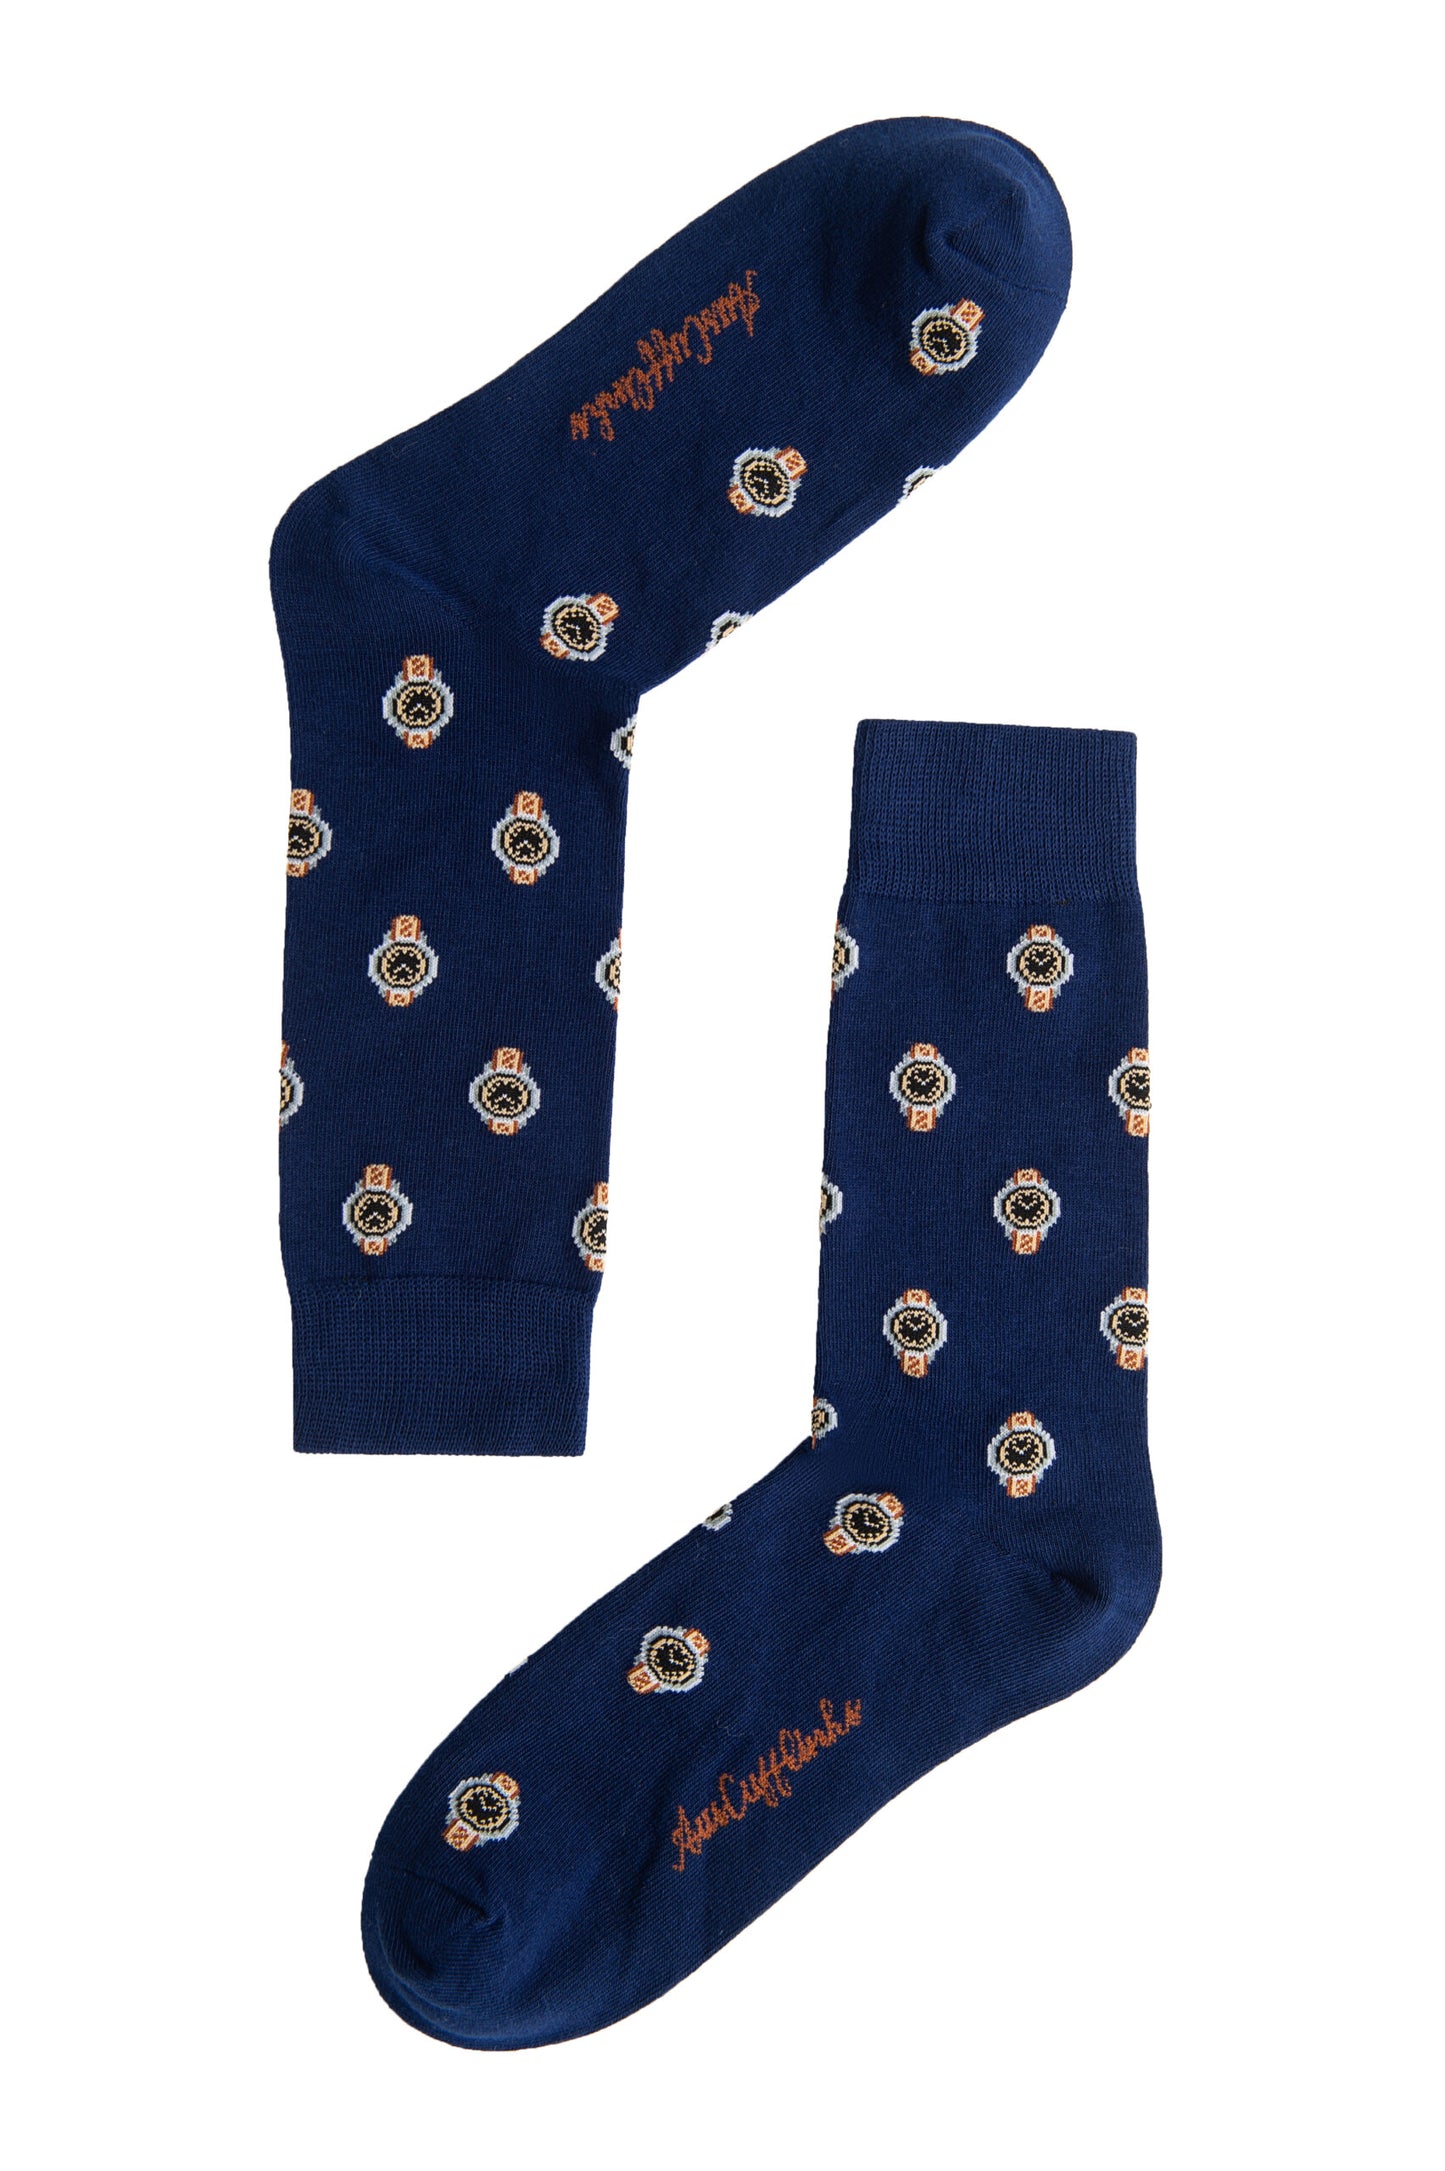 A pair of Watch Socks with gold and red insignia patterns and timeless cursive branding along the toes, displayed on a white background.